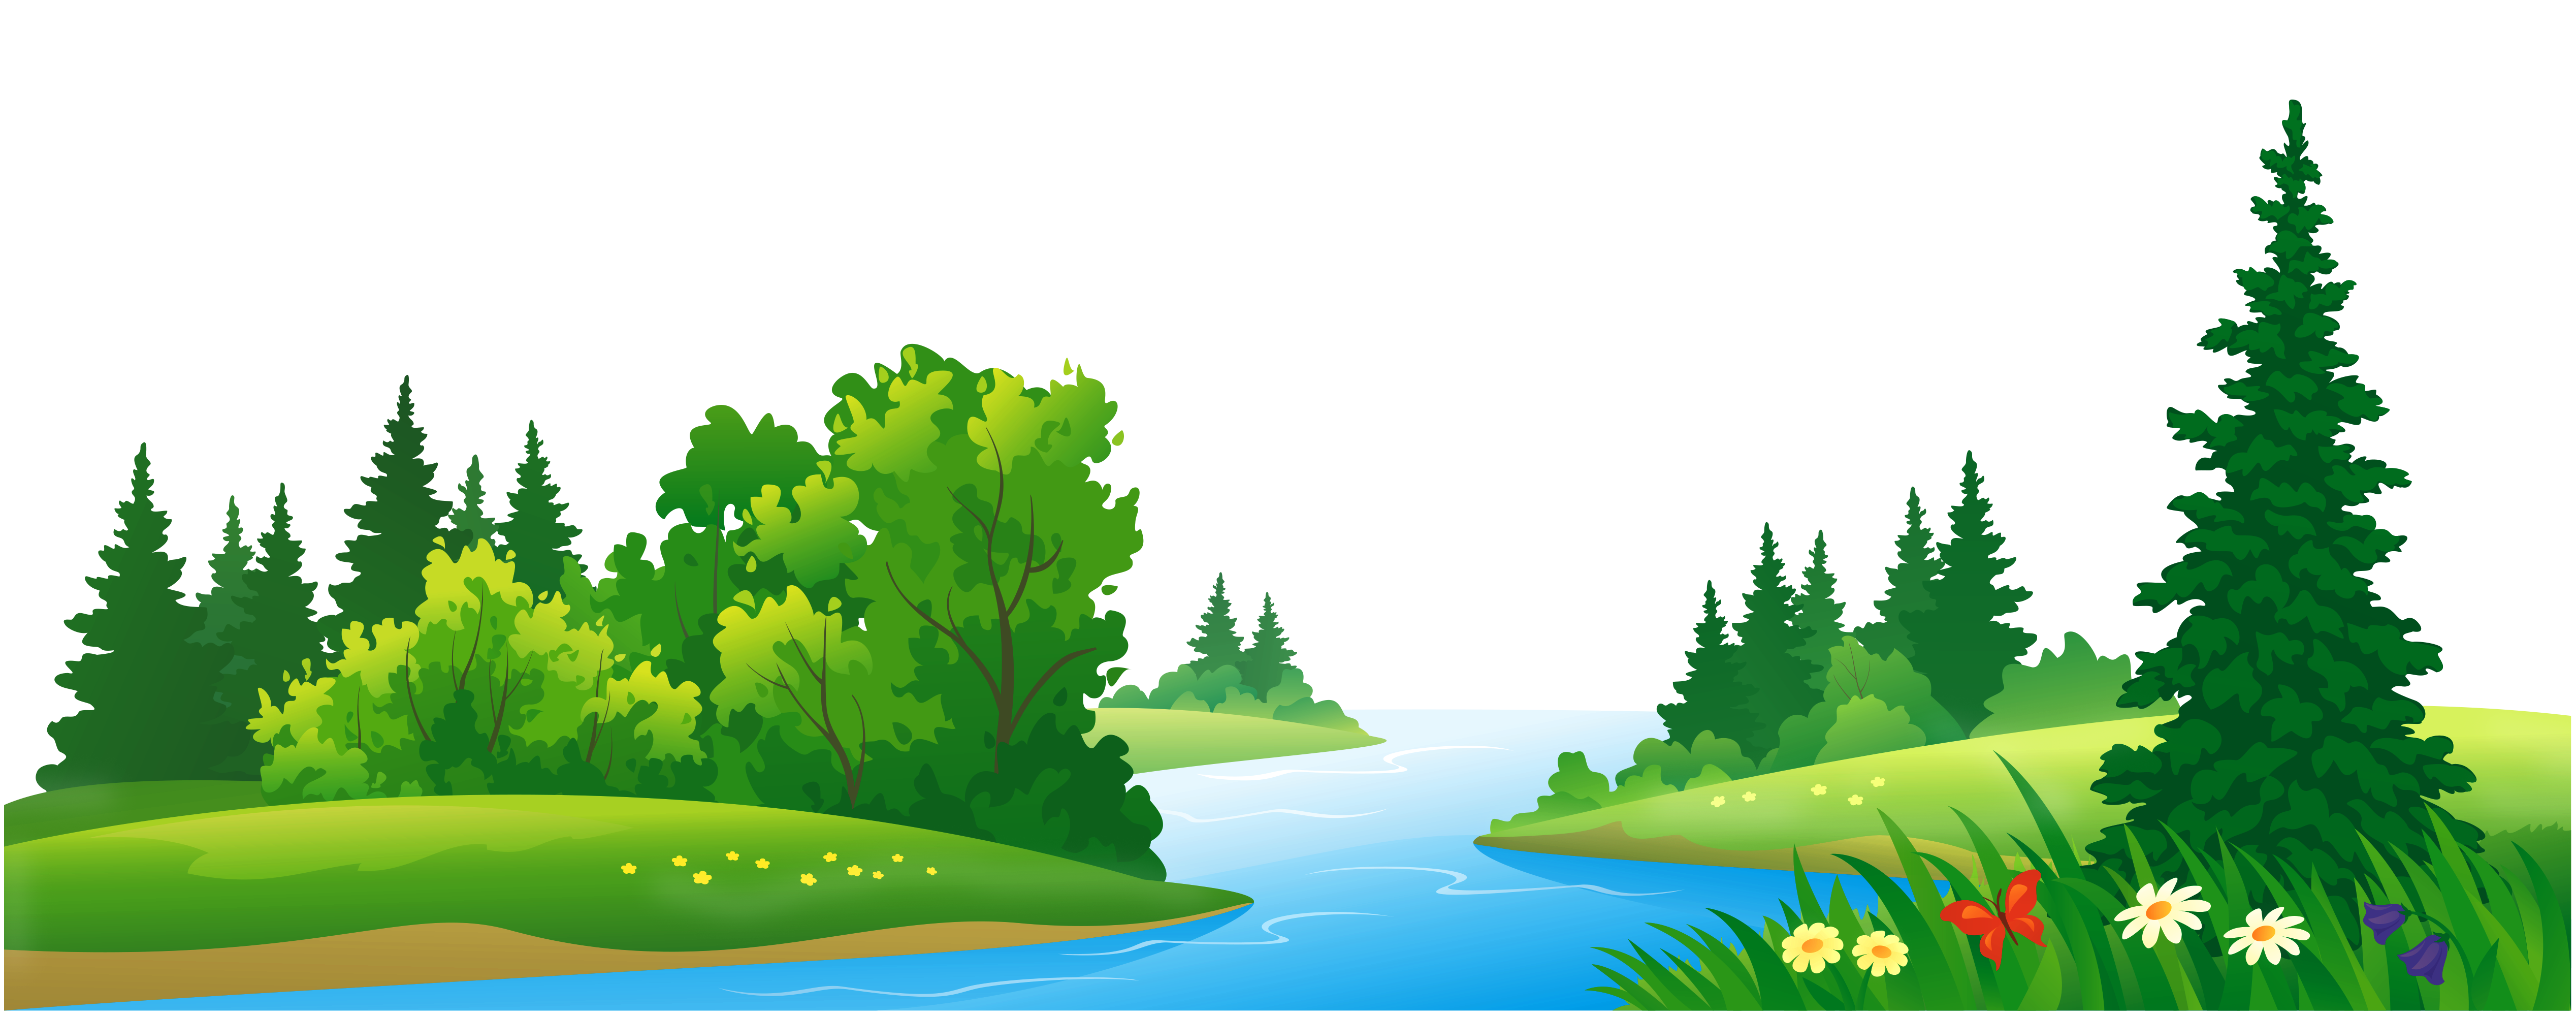 Free Forest Clipart. Forest